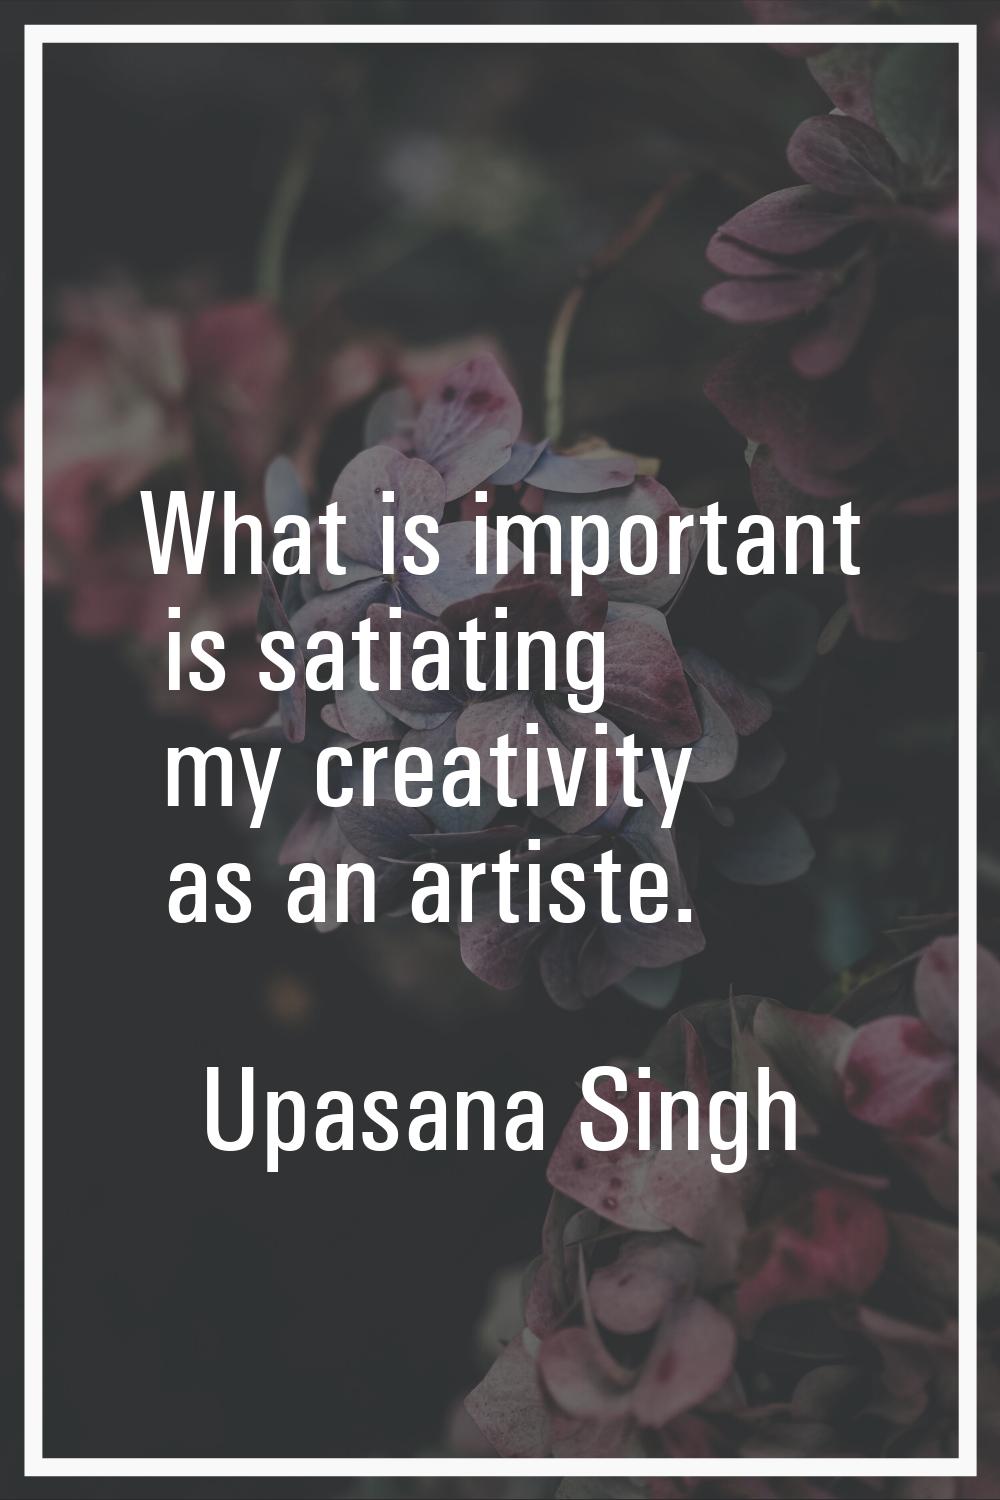 What is important is satiating my creativity as an artiste.